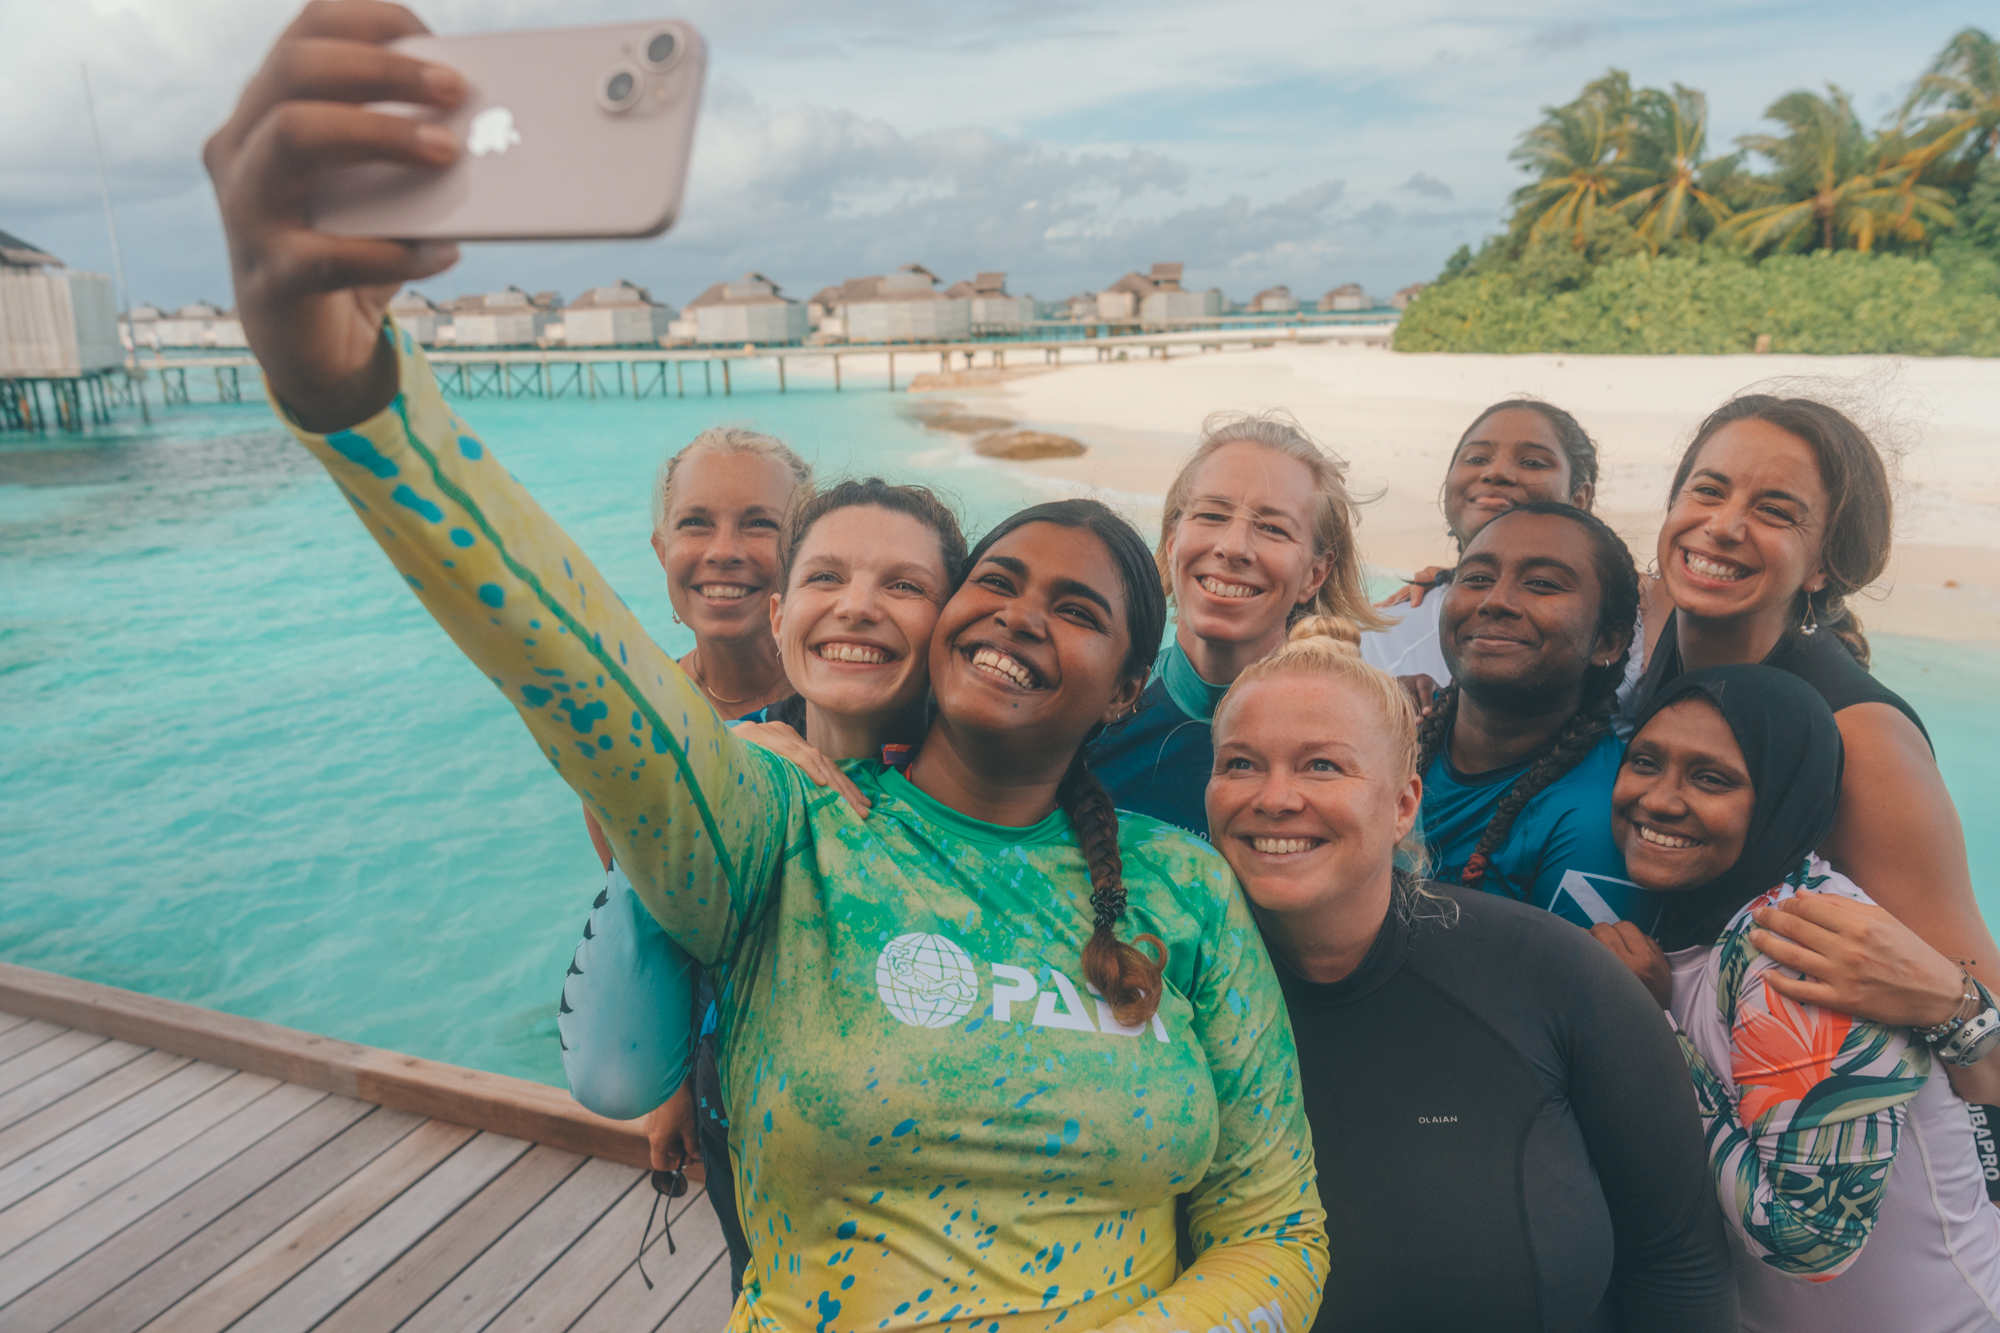 A group of female diveers in the maldives take a group selfie on a dock